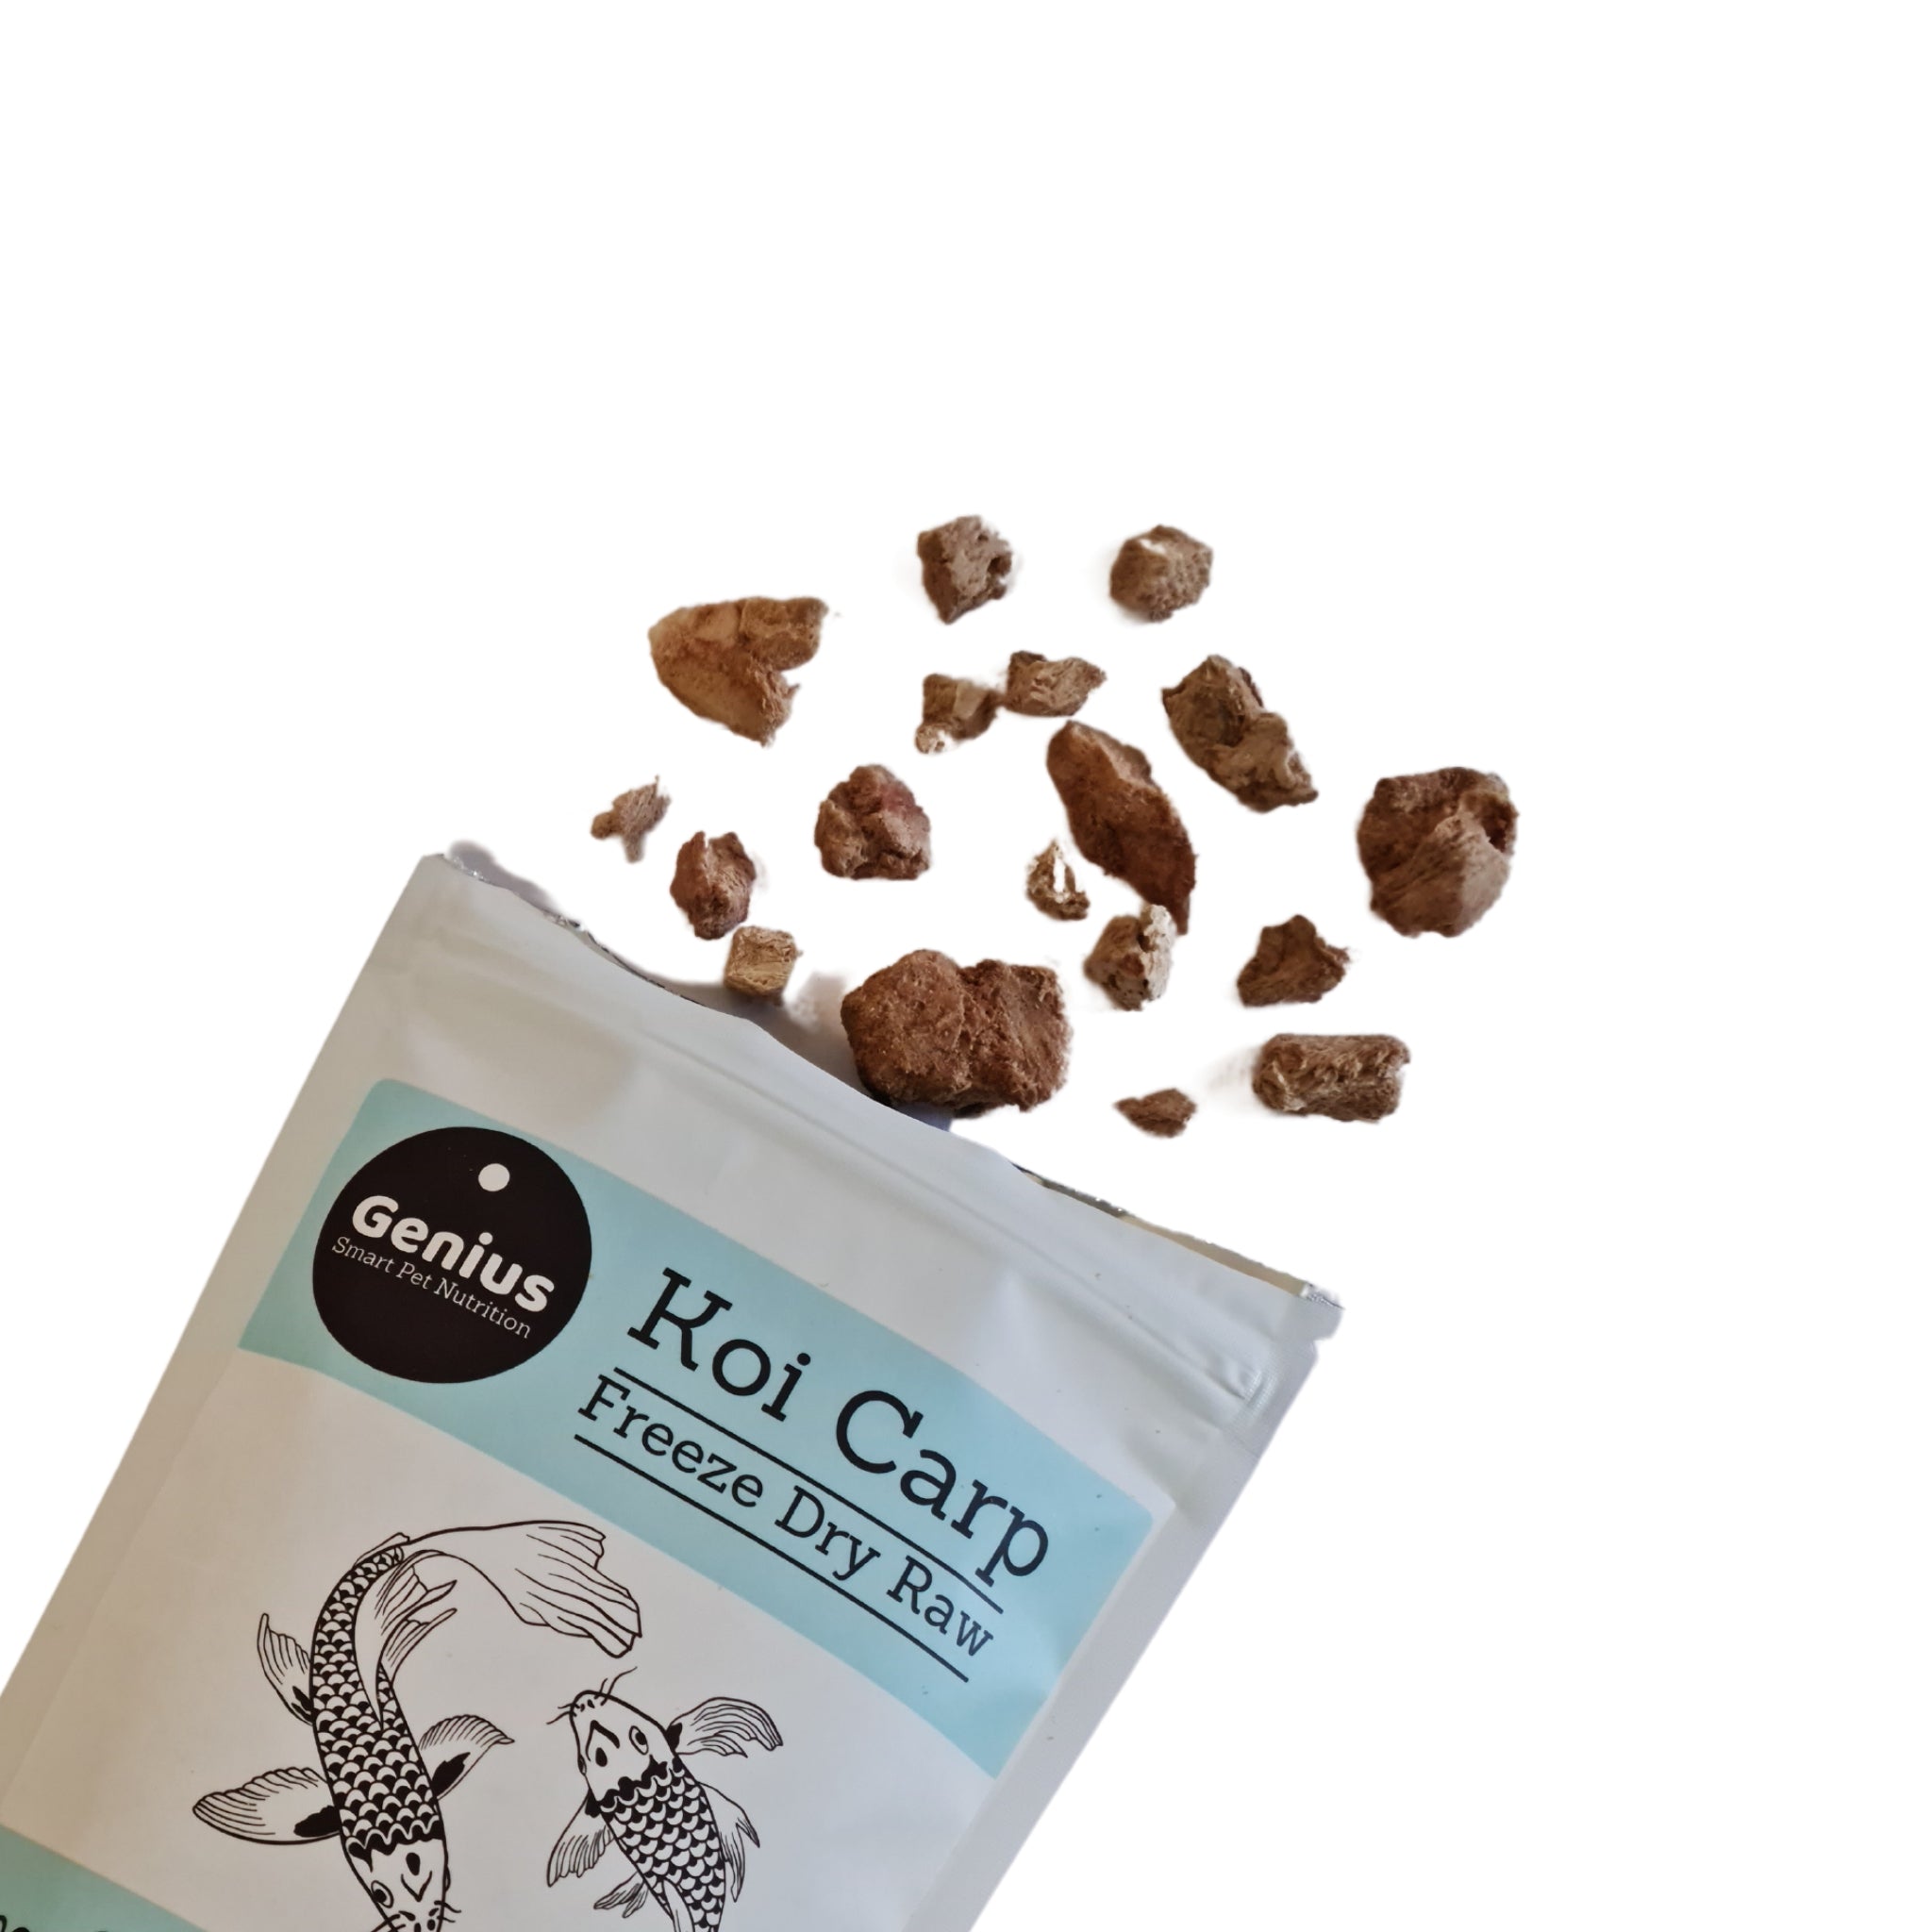 Freeze dried Koi Carp cat and dog treats with packet